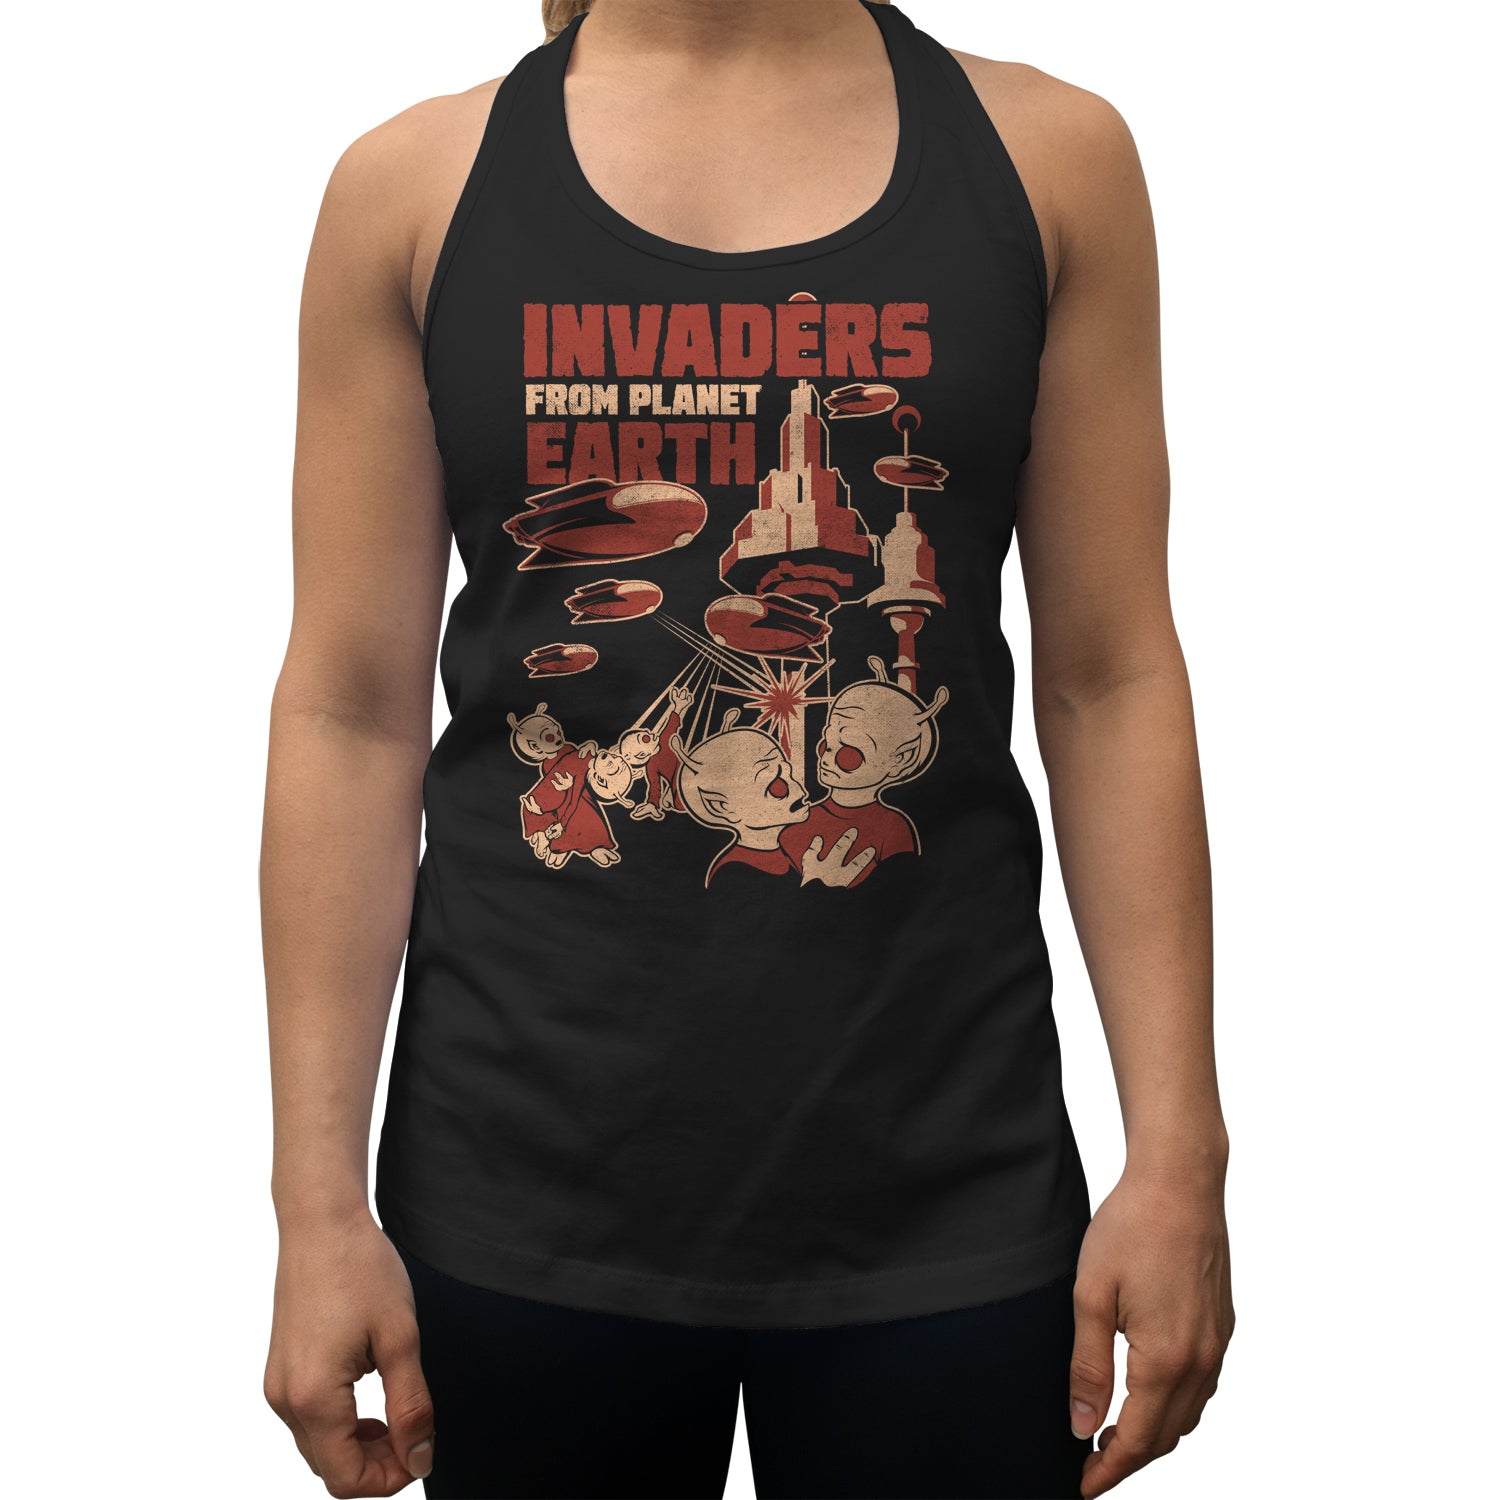 Women's Invaders From Earth Racerback Tank Top